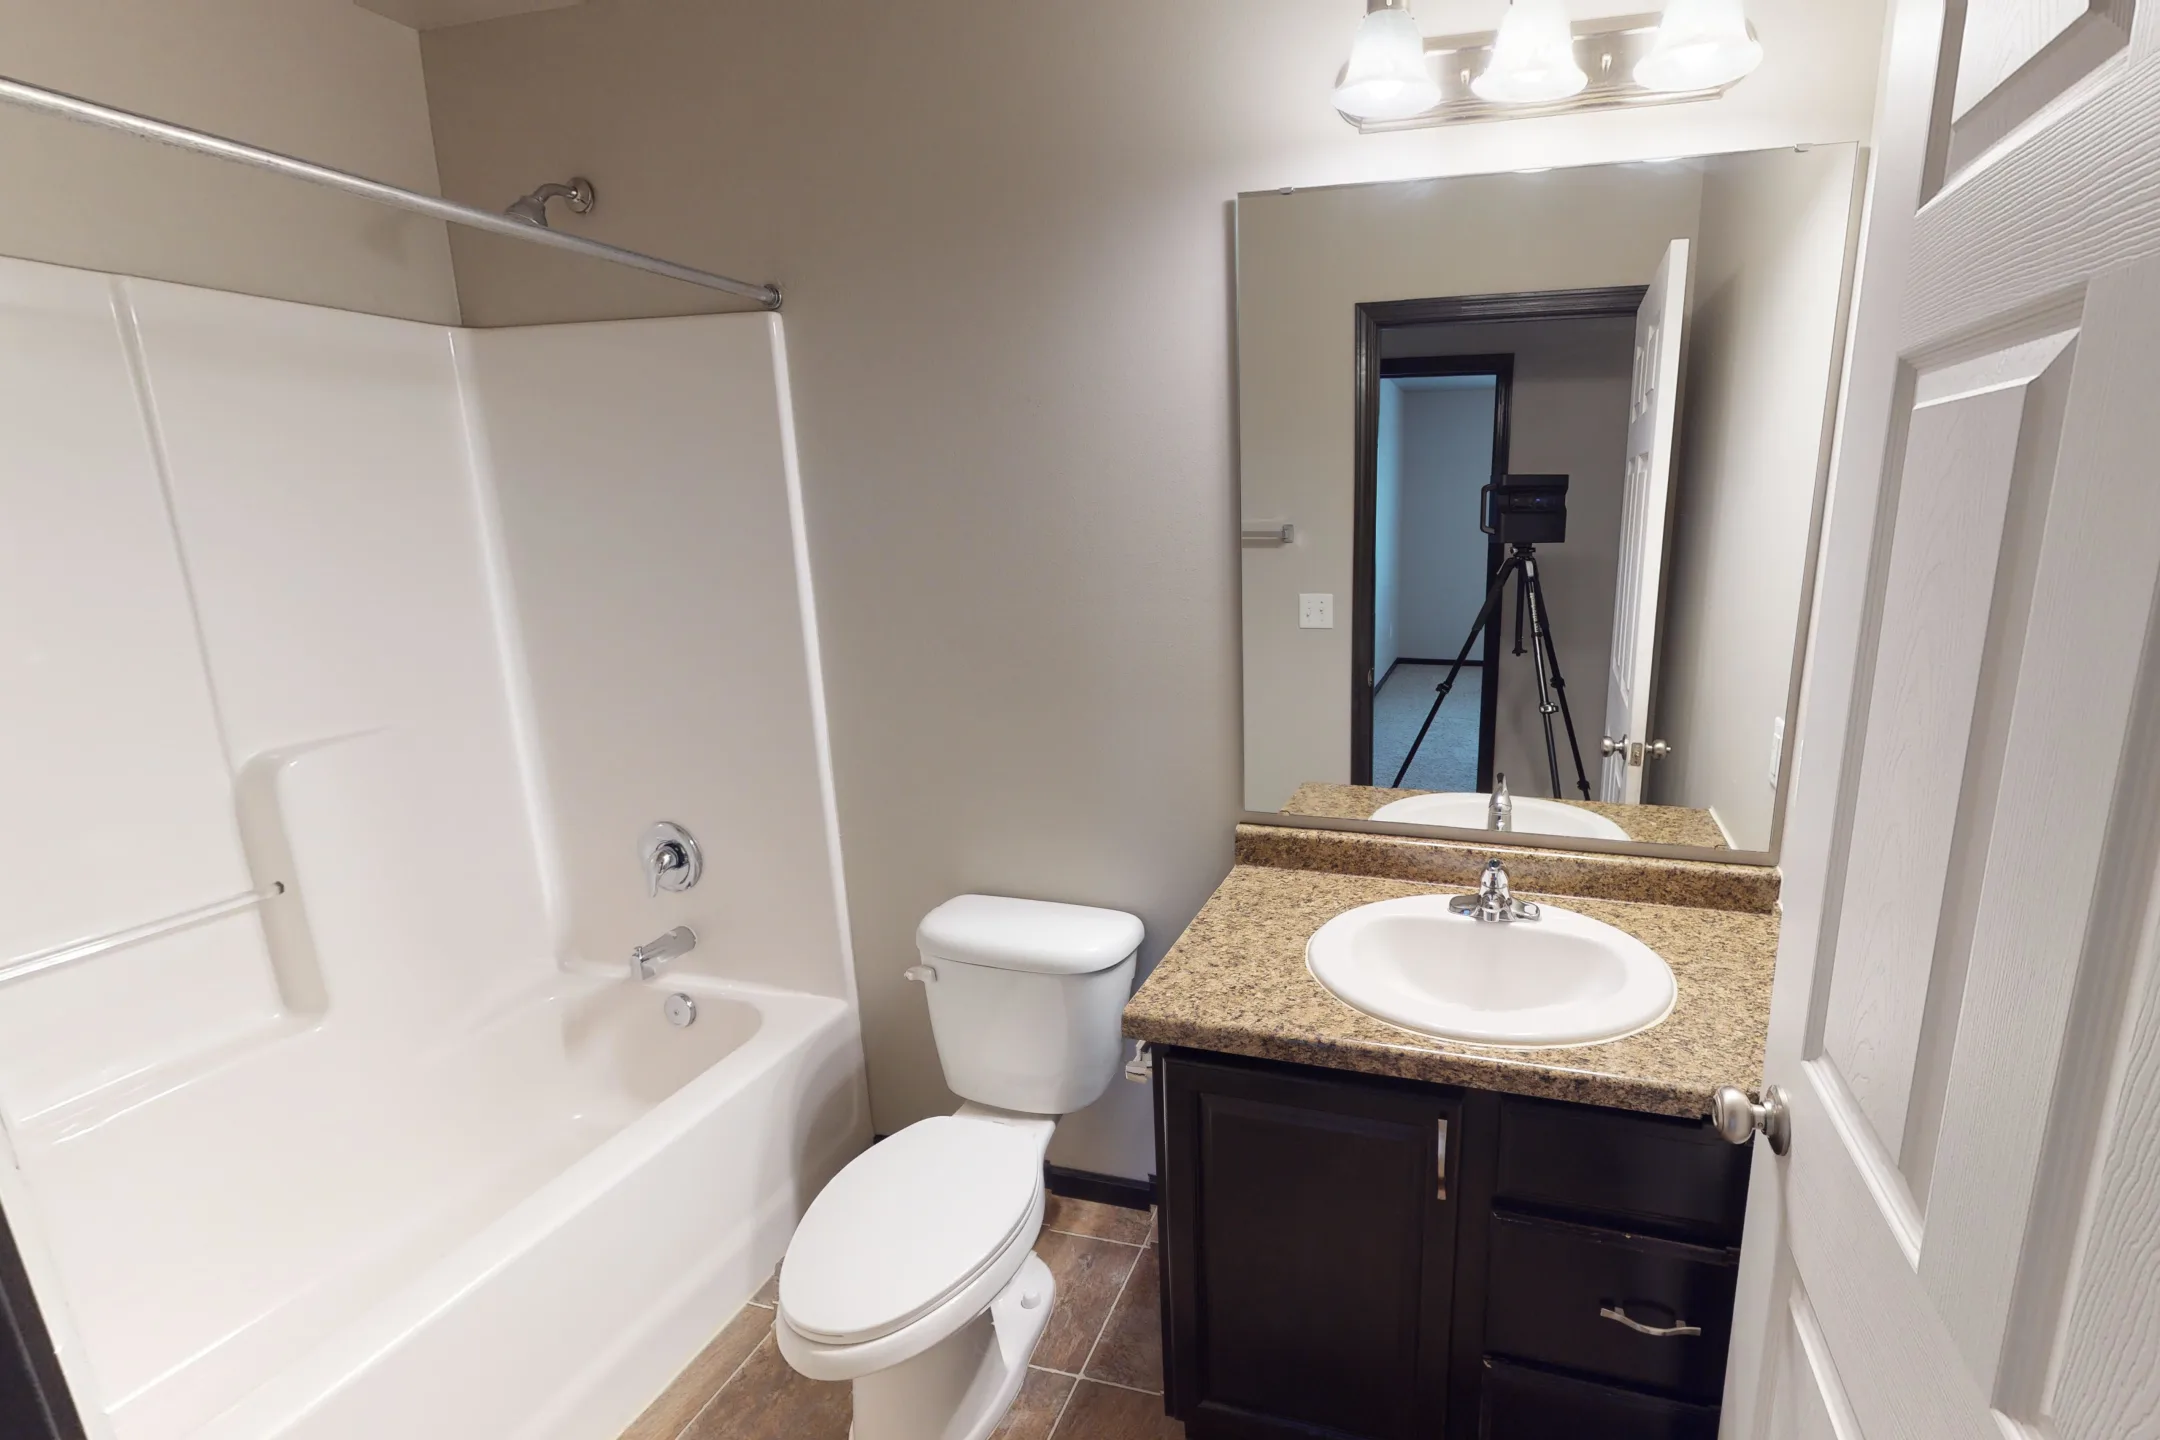 Bathroom - Town Square Townhomes - Fargo, ND